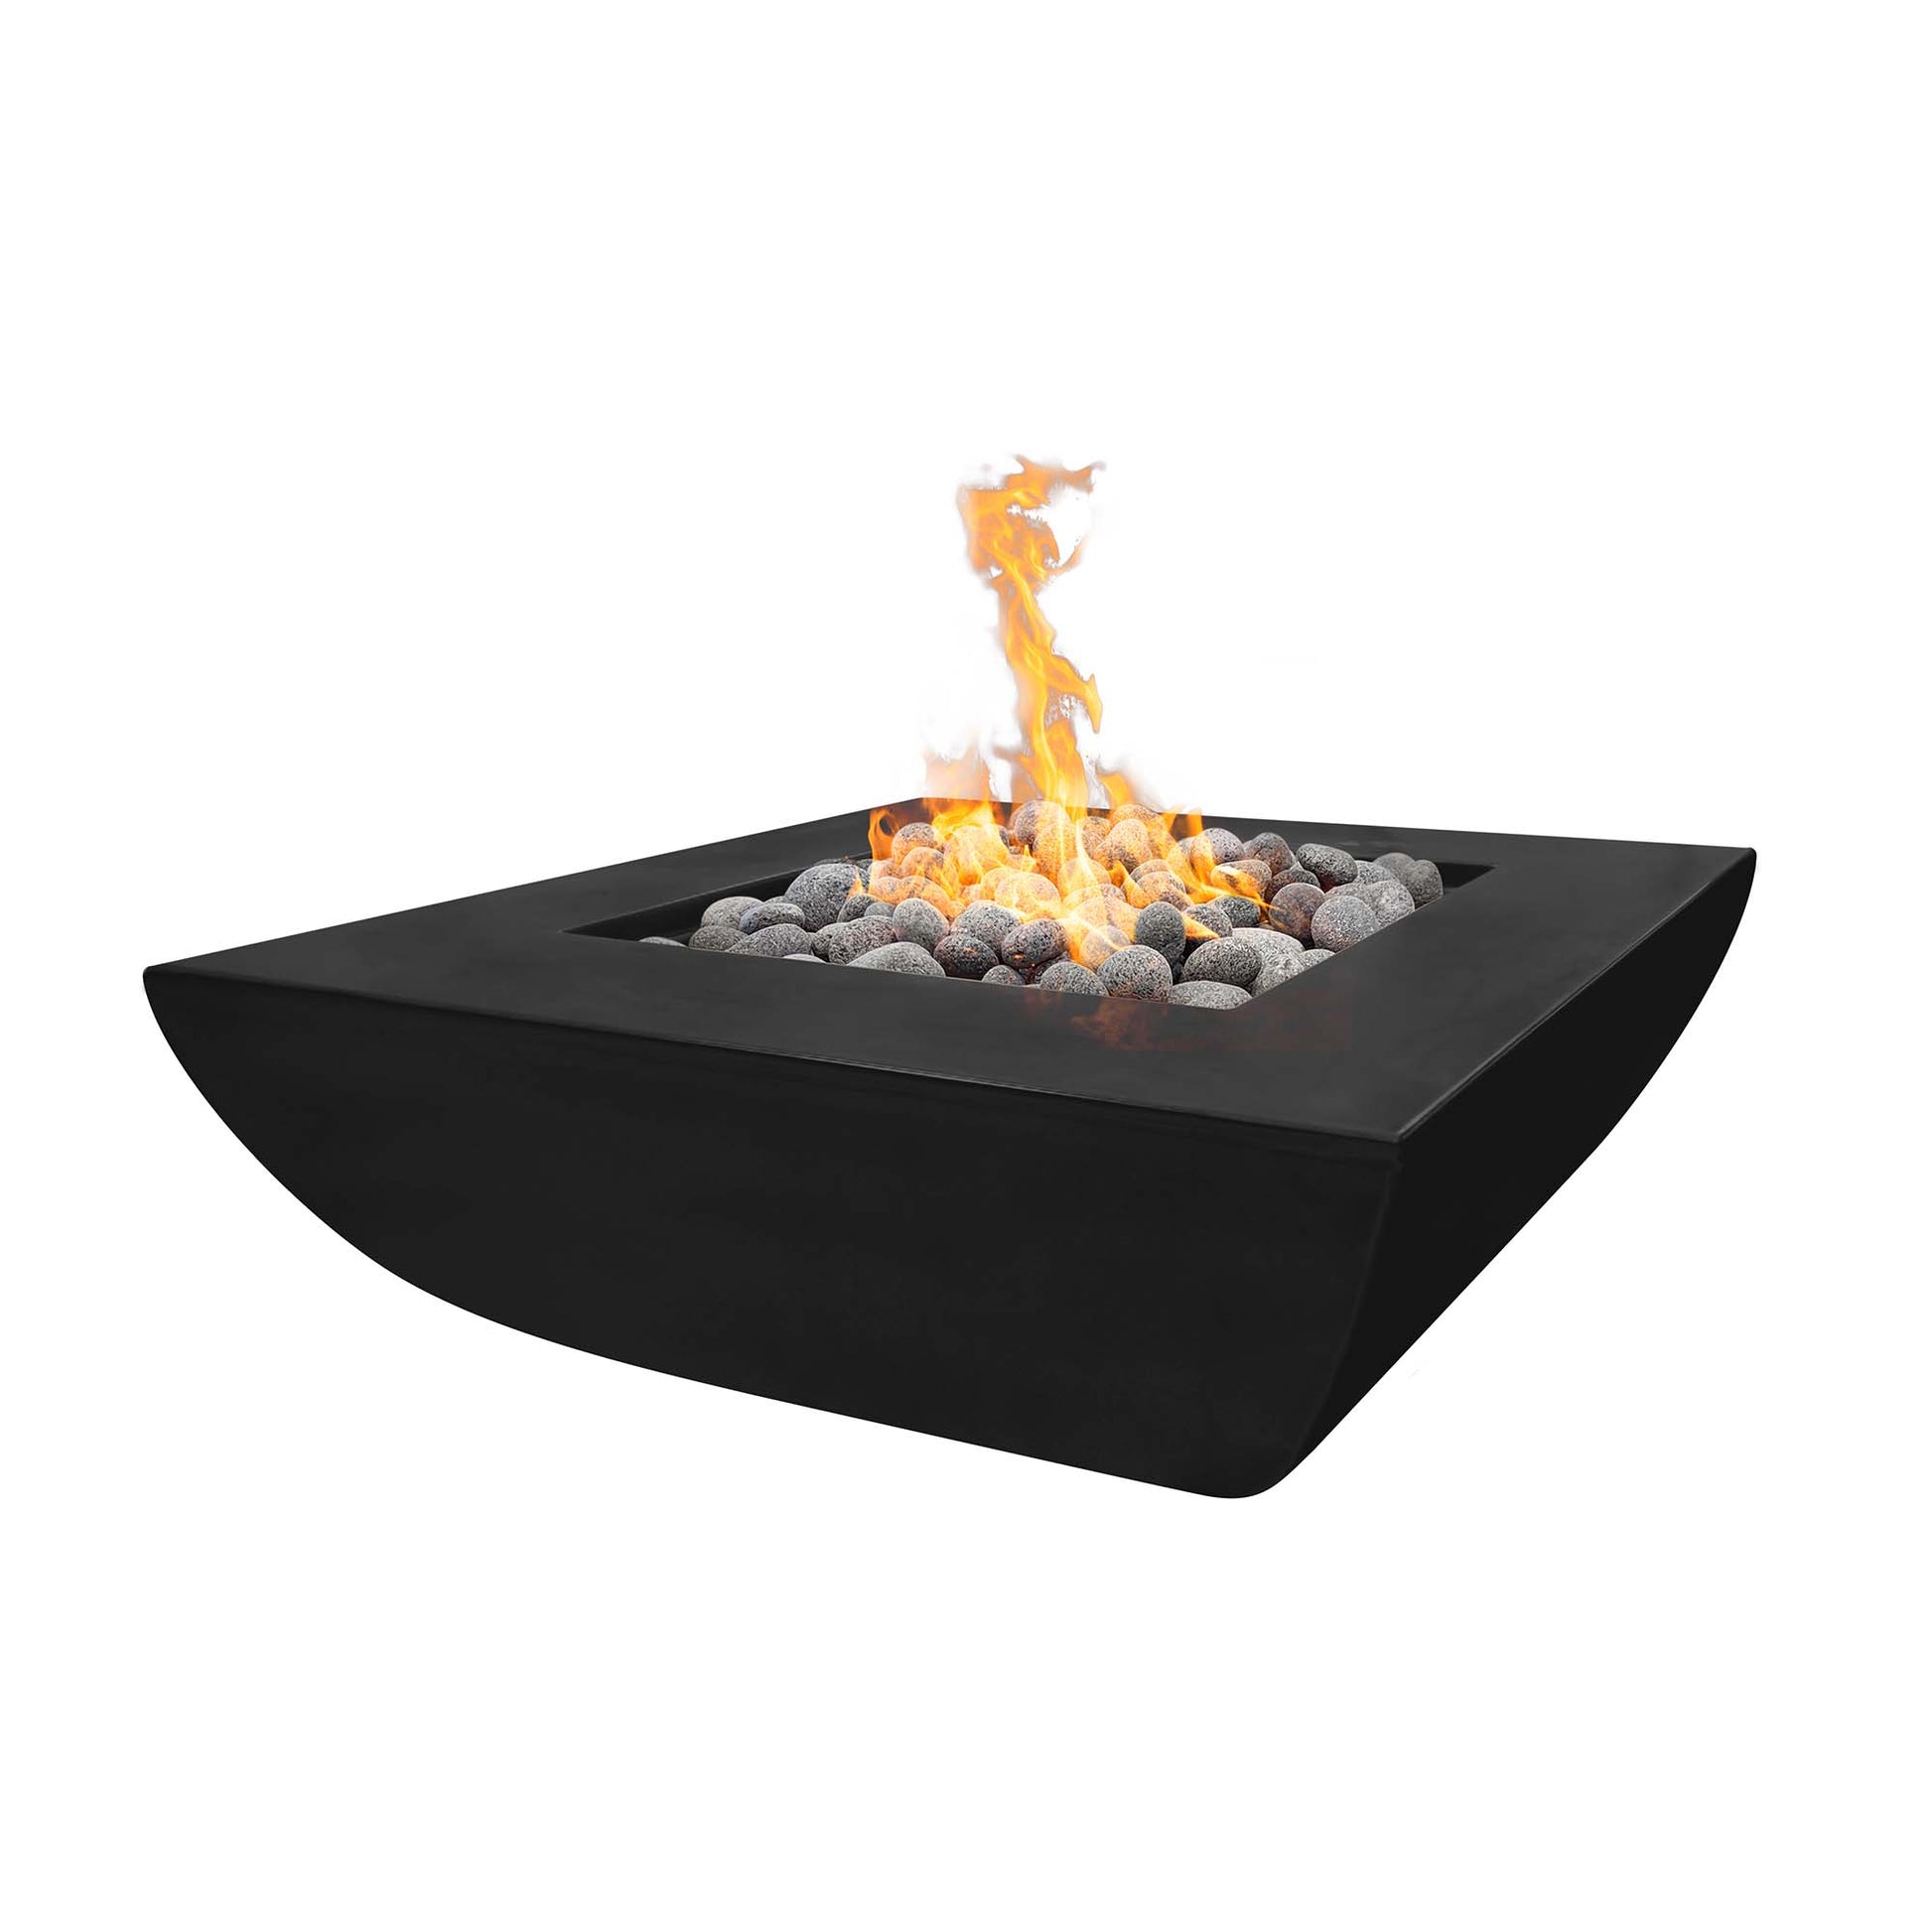 The Outdoor Plus Square Avalon 42" Metallic Pearl GFRC Concrete Natural Gas Fire Pit with Match Lit with Flame Sense Ignition